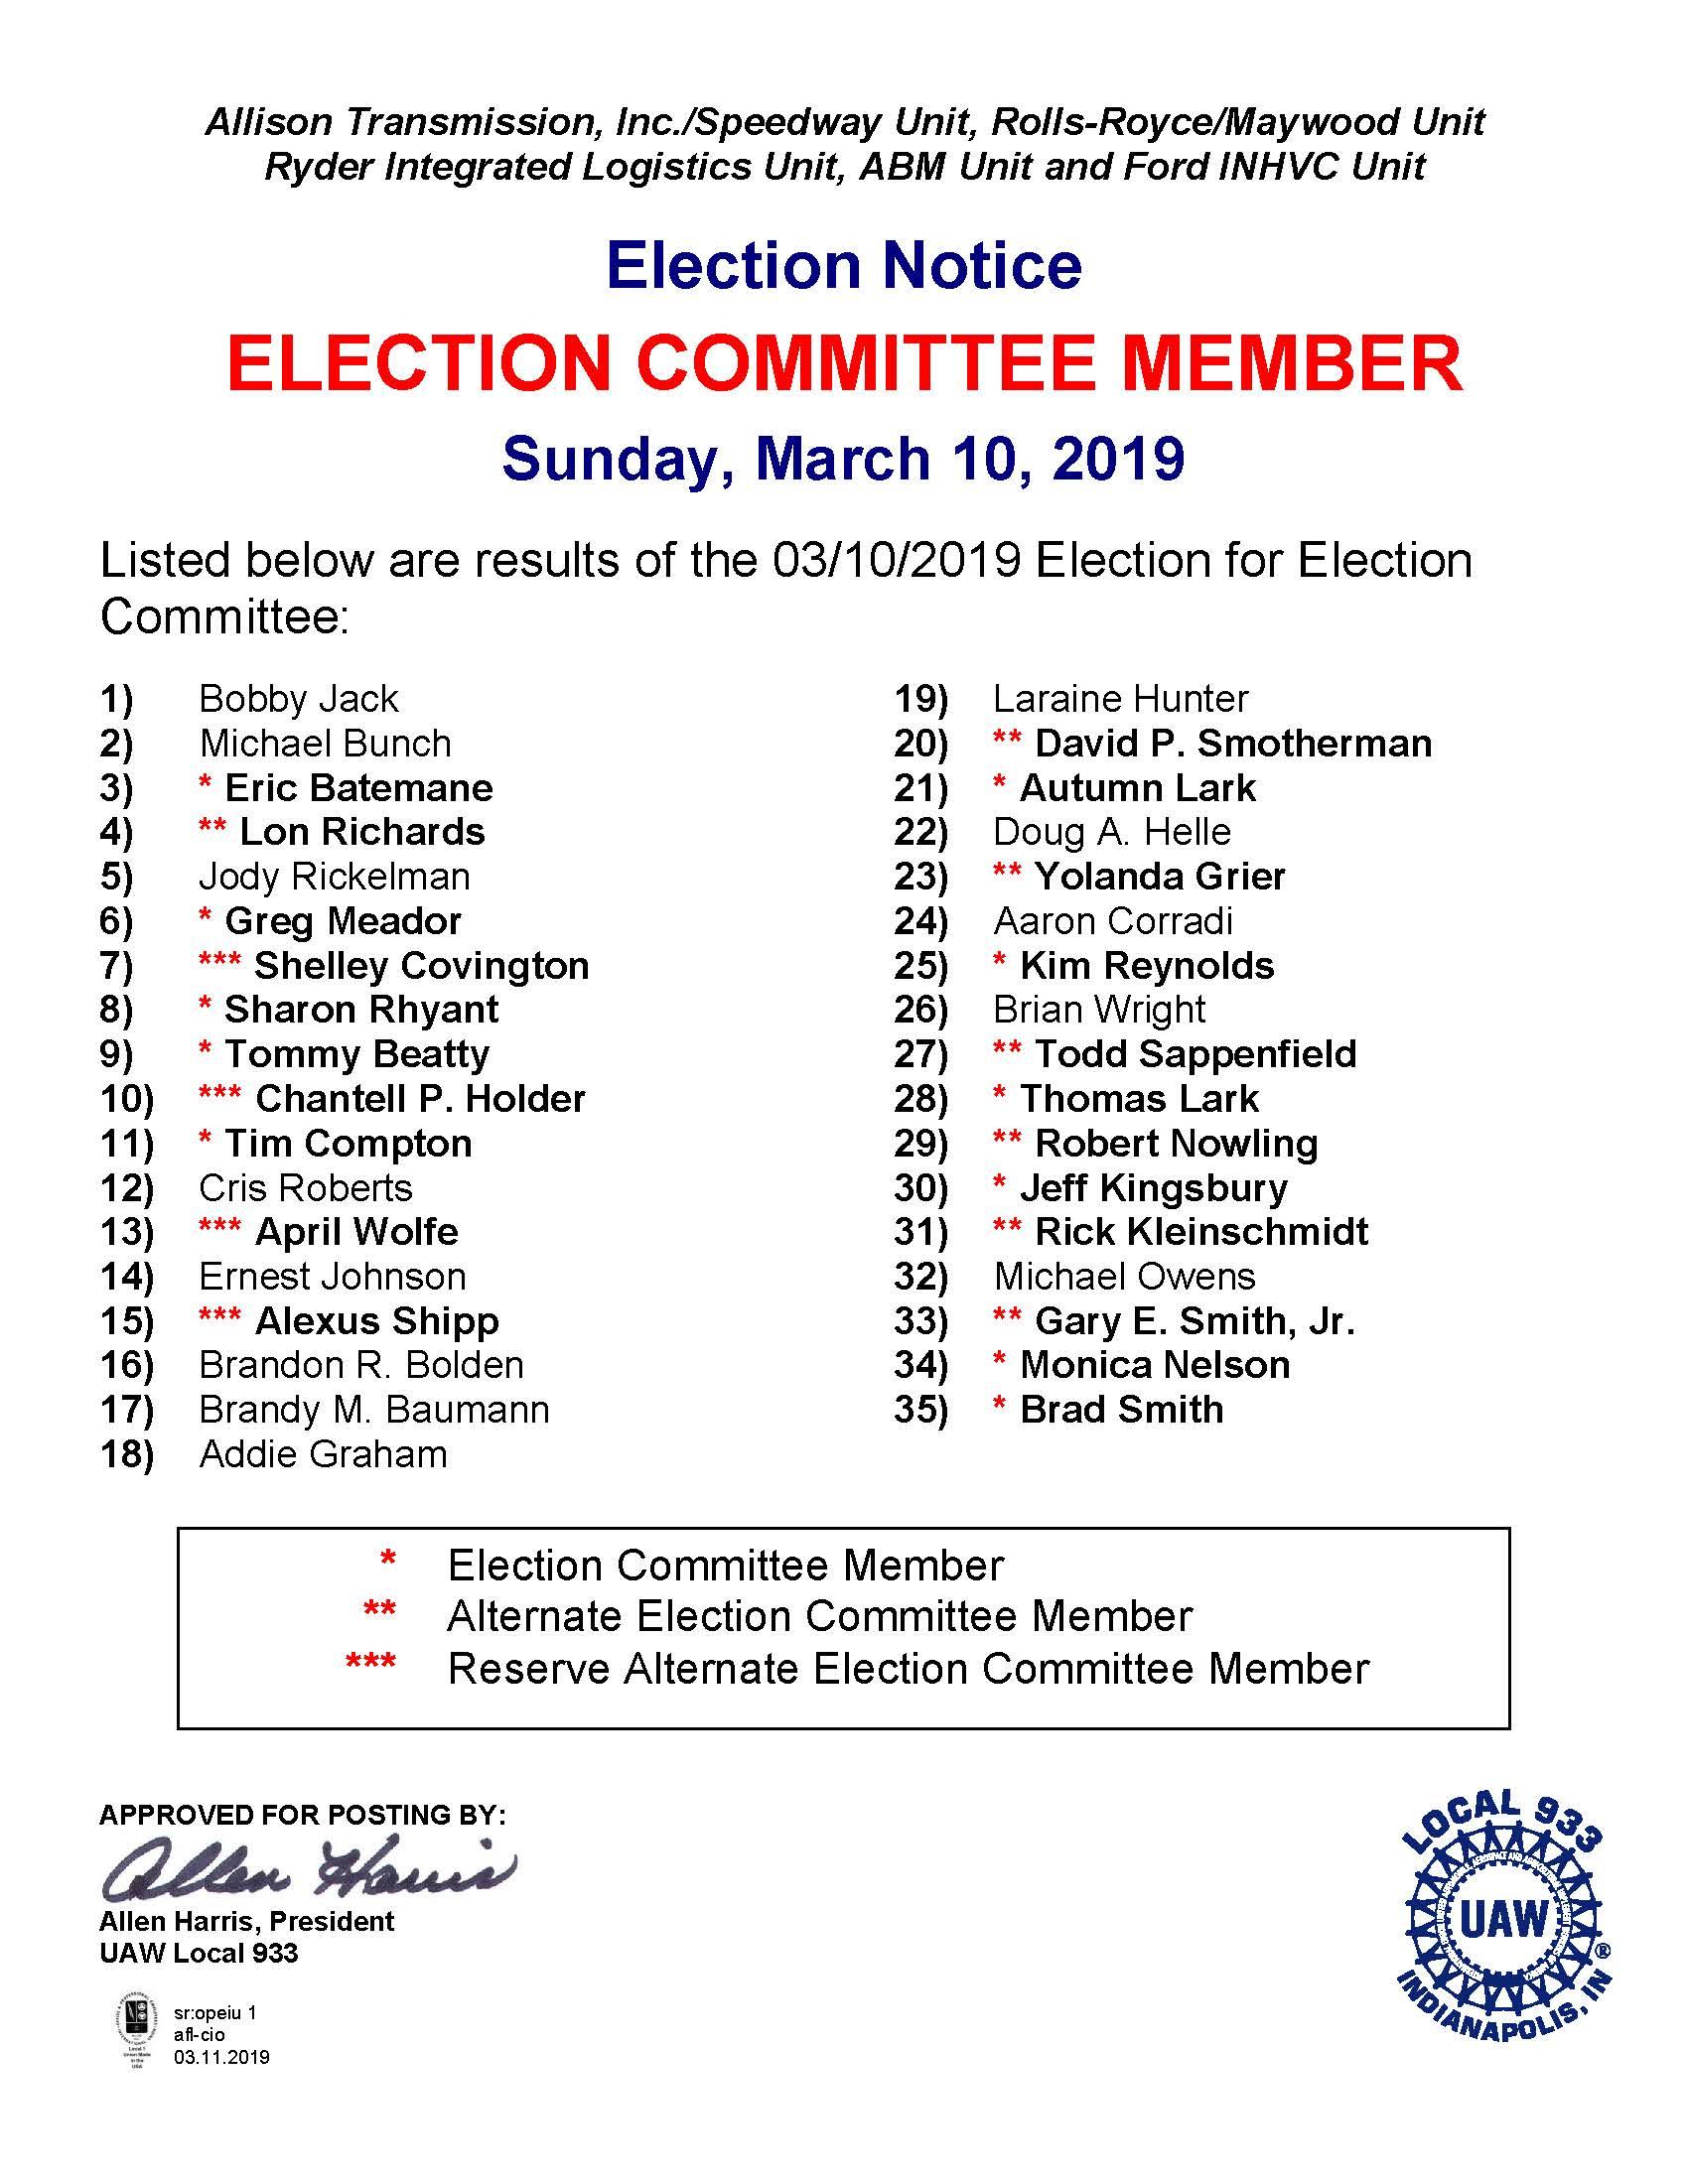 ELECTION COMMITTEE MEMBER RESULTS UAW Local 933